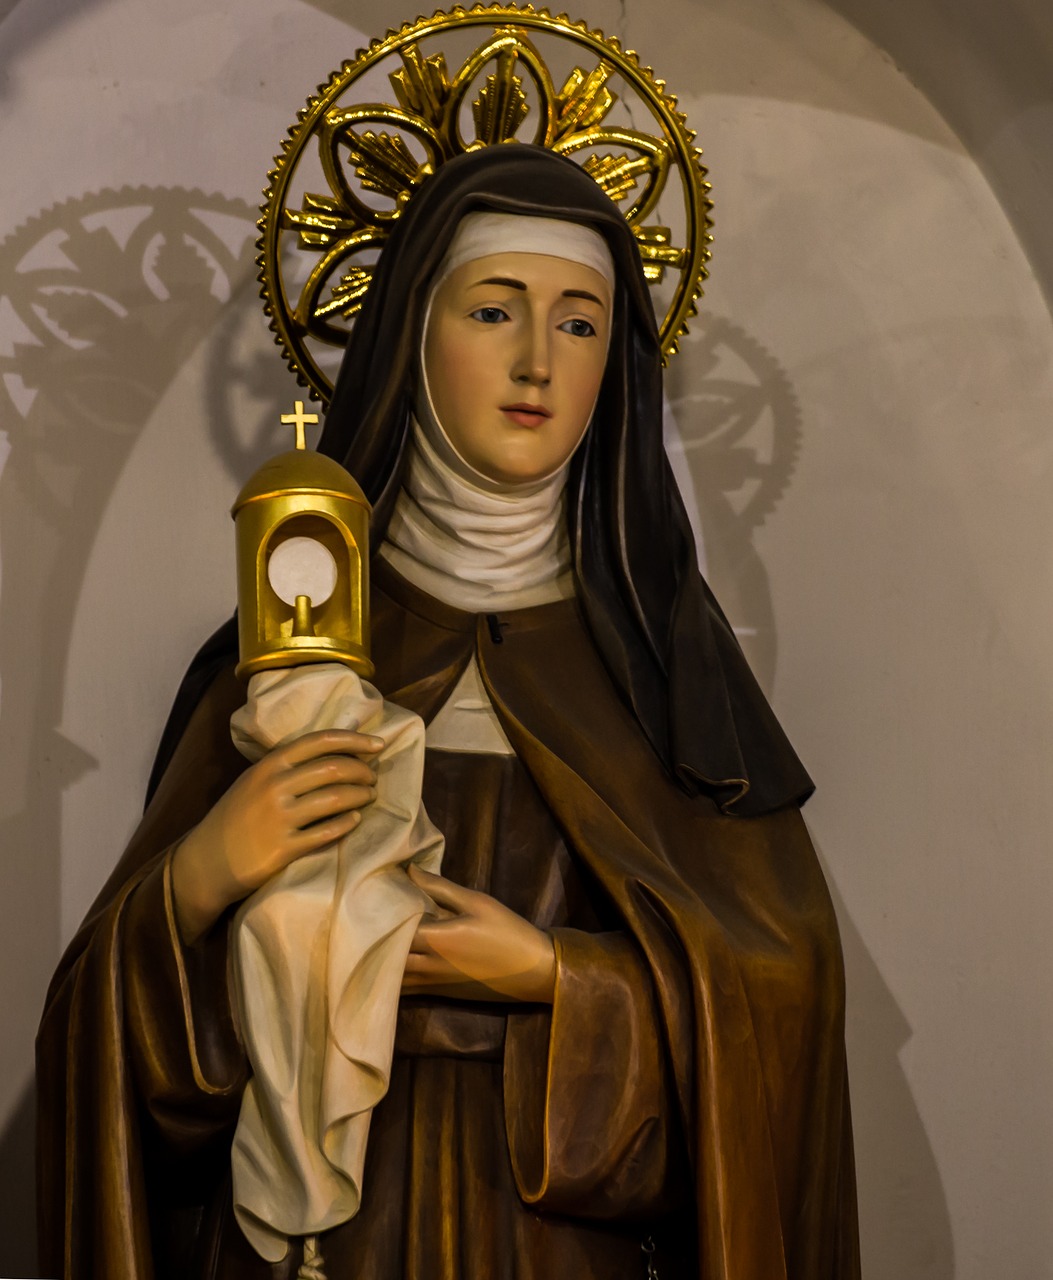 St.-Clare-of-Assissi.jpg?width=197